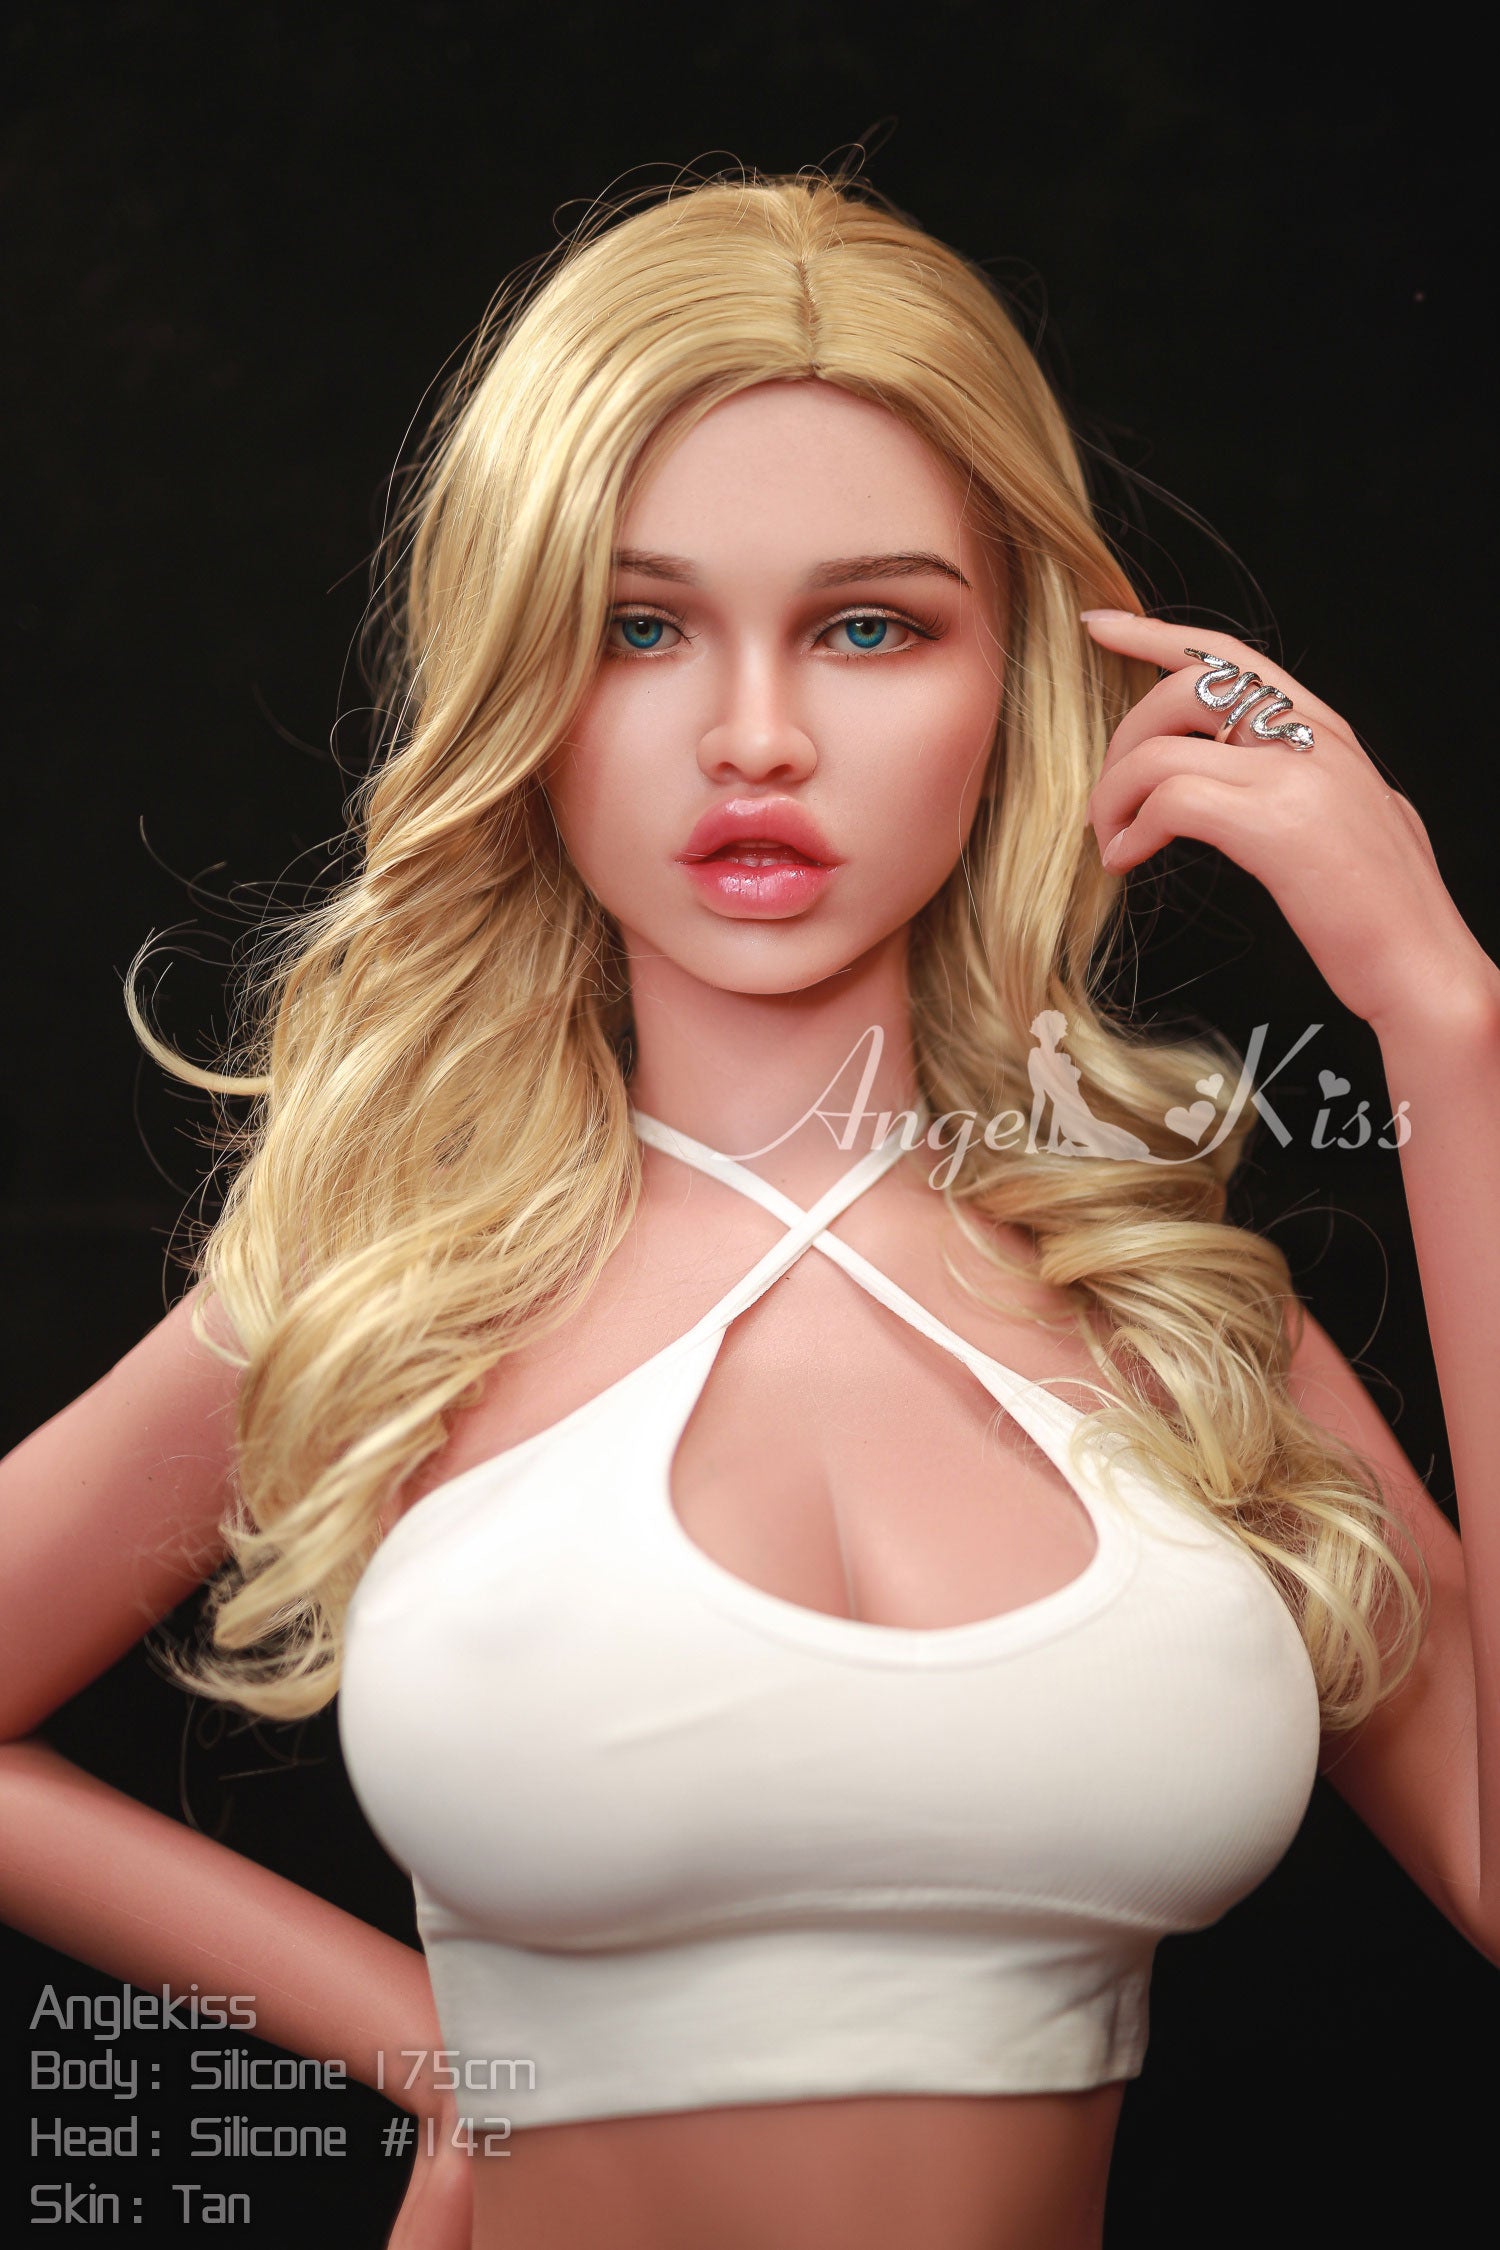 Angelkiss Doll 175 cm Silicone - Hana | Buy Sex Dolls at DOLLS ACTUALLY